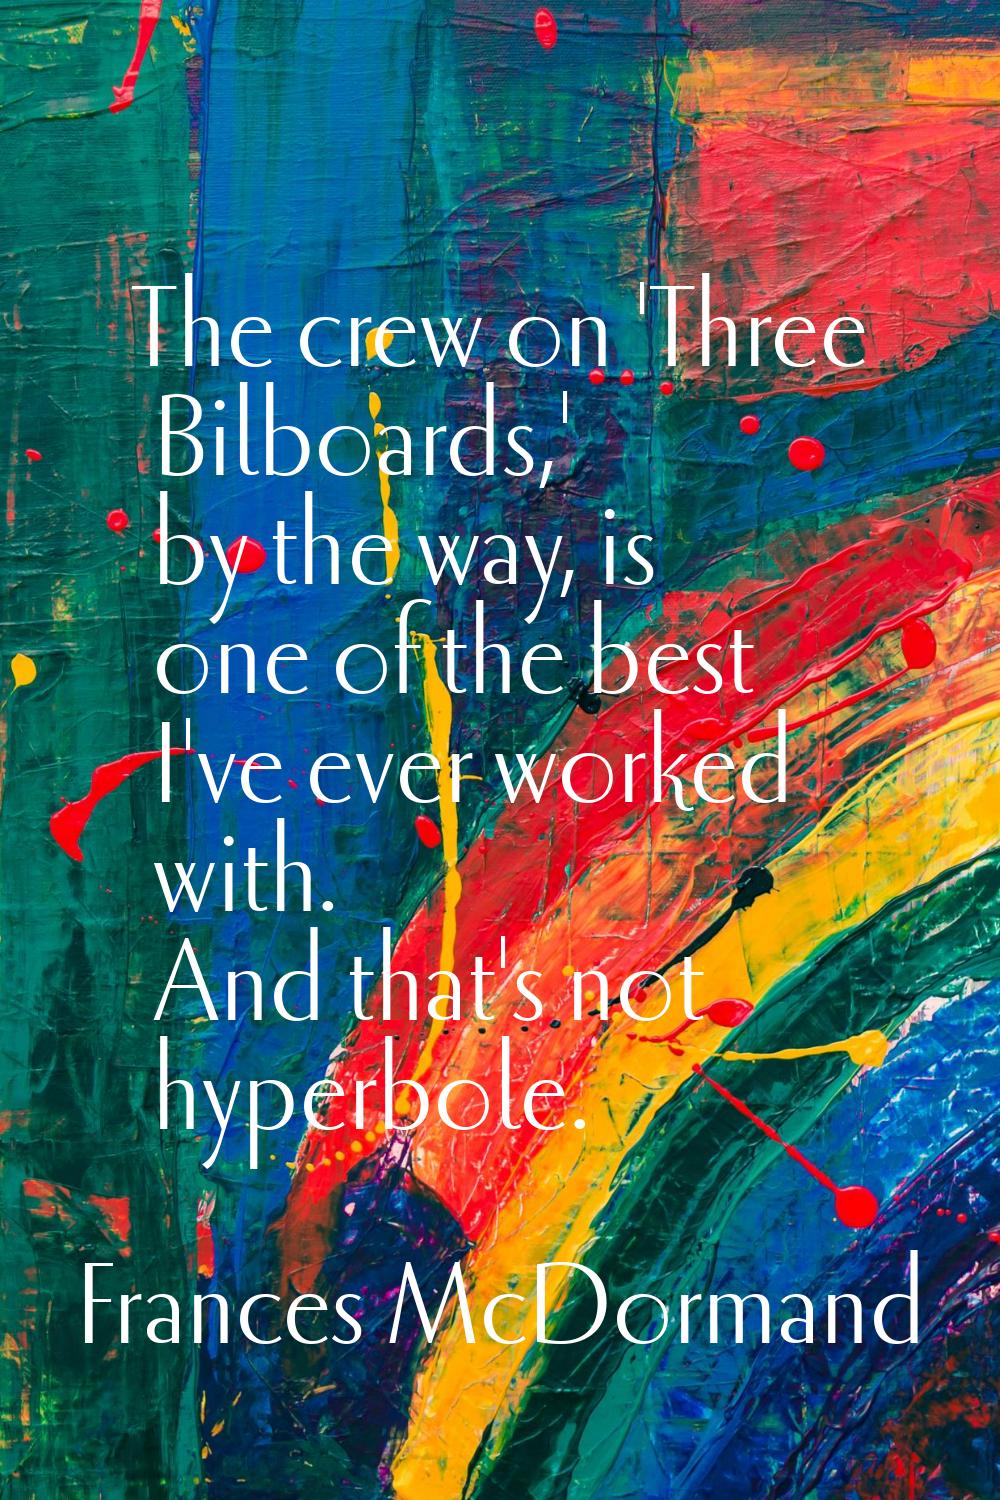 The crew on 'Three Bilboards,' by the way, is one of the best I've ever worked with. And that's not